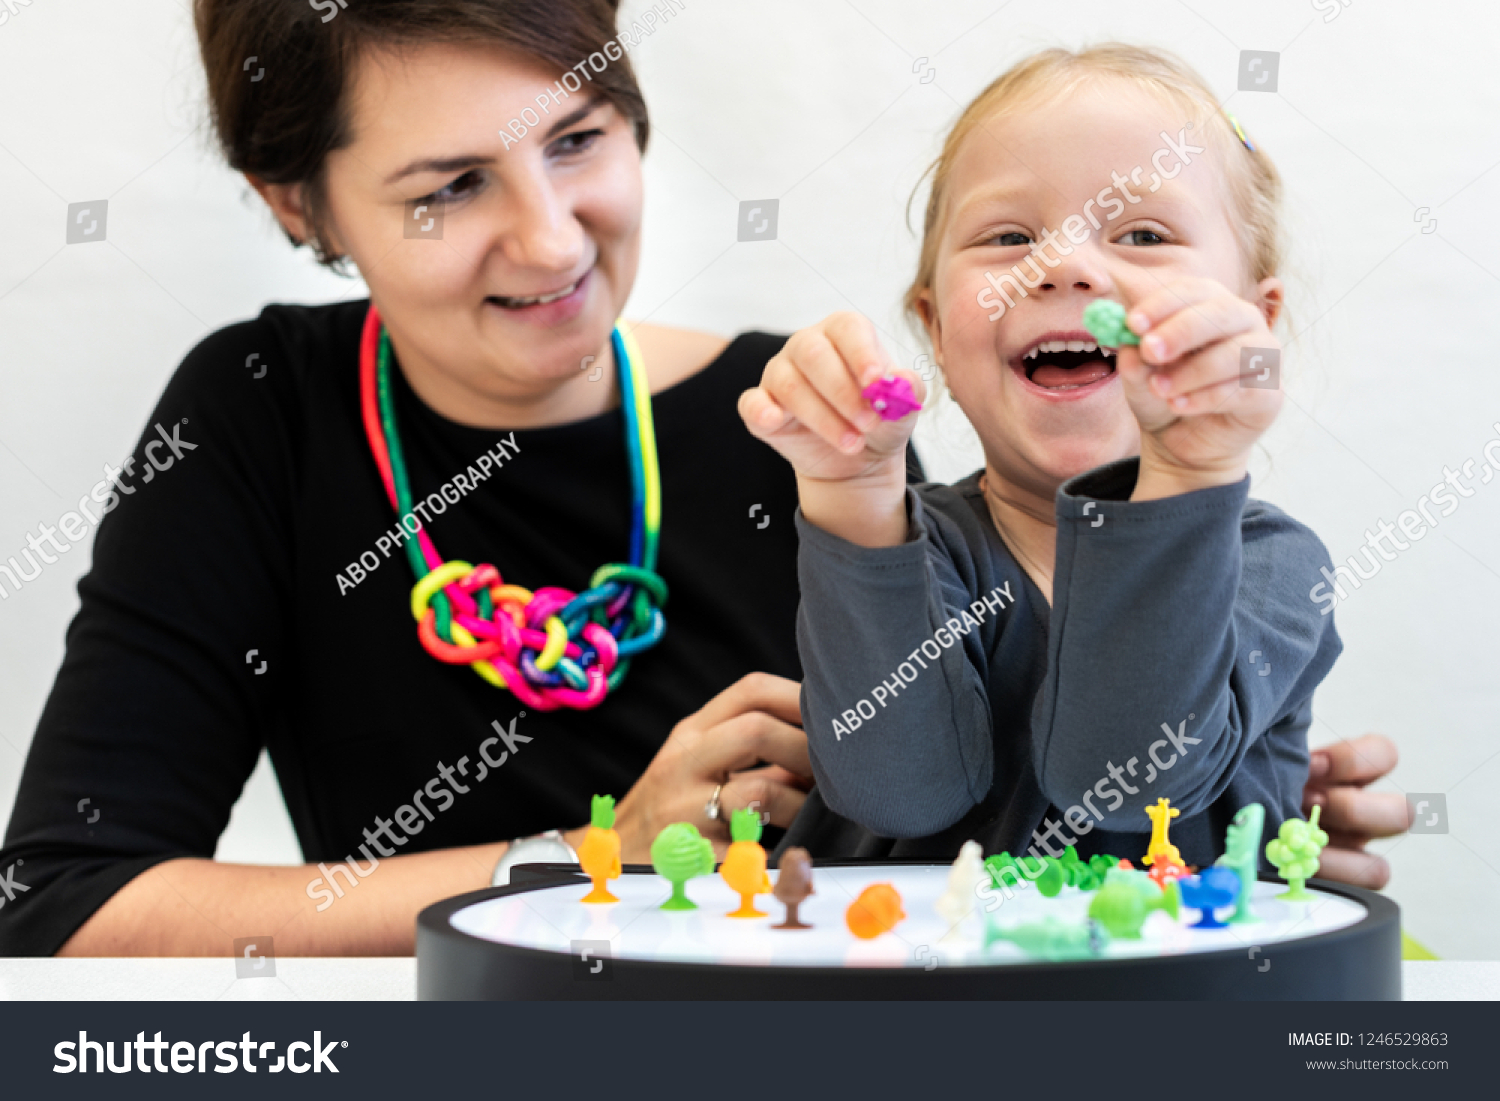 Toddler girl in child occupational therapy session doing sensory playful exercises with her therapist.  #1246529863